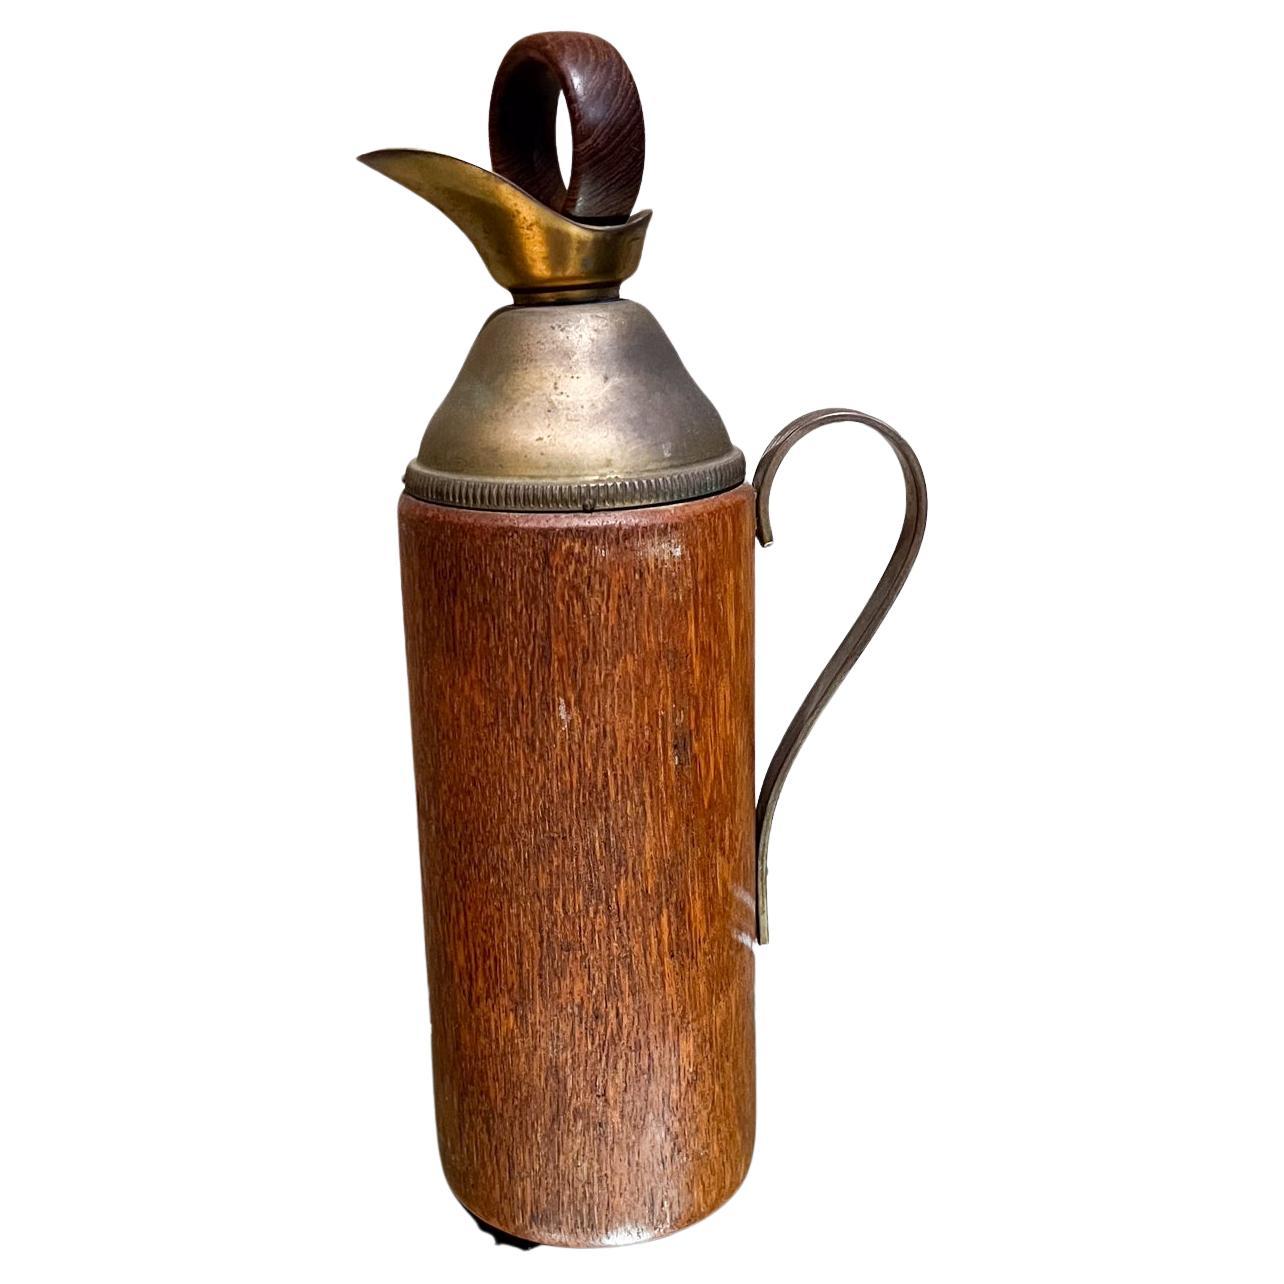 1950s Aldo Tura Carafe Pitcher Teak and Brass Italy For Sale